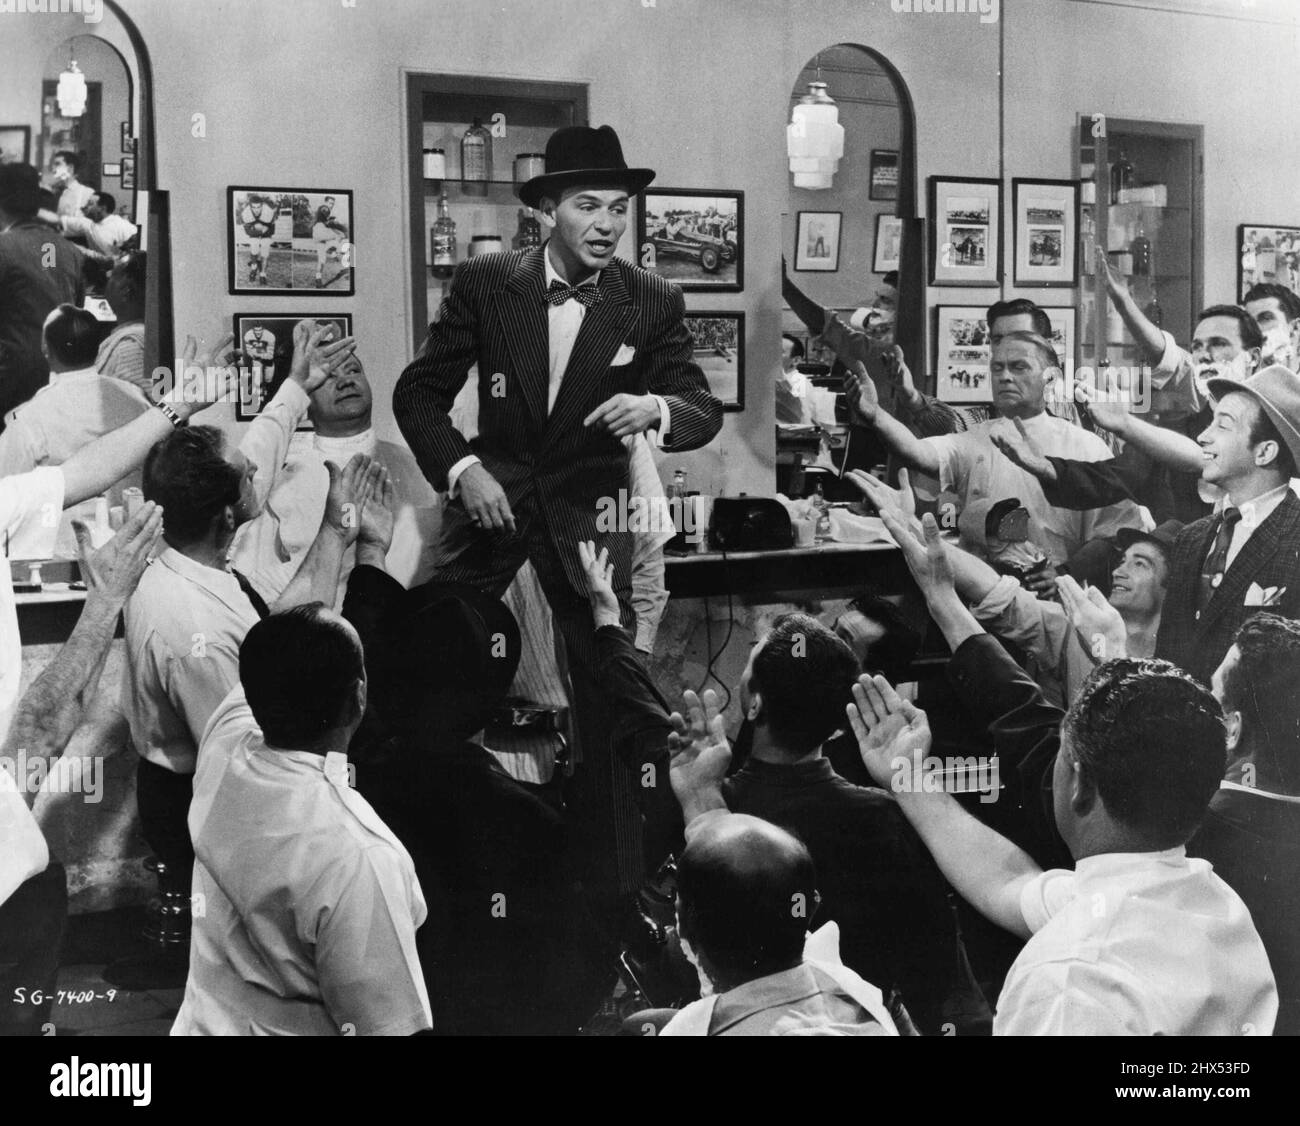 Tonsorial Tribute Nathan Detroit (Frank Sinatra) as proprietor of the 'oldest established permanent floating crap game,' receives a tribute from the barber shop patrons in scene from the Samuel Goldwyn production of 'Guys and Dolls' The lavish film musical, being released by MGM, stars Marlon Brando, Jean Simmons, Sinatra and Vivian Blaine. October 31, 1955. Stock Photo